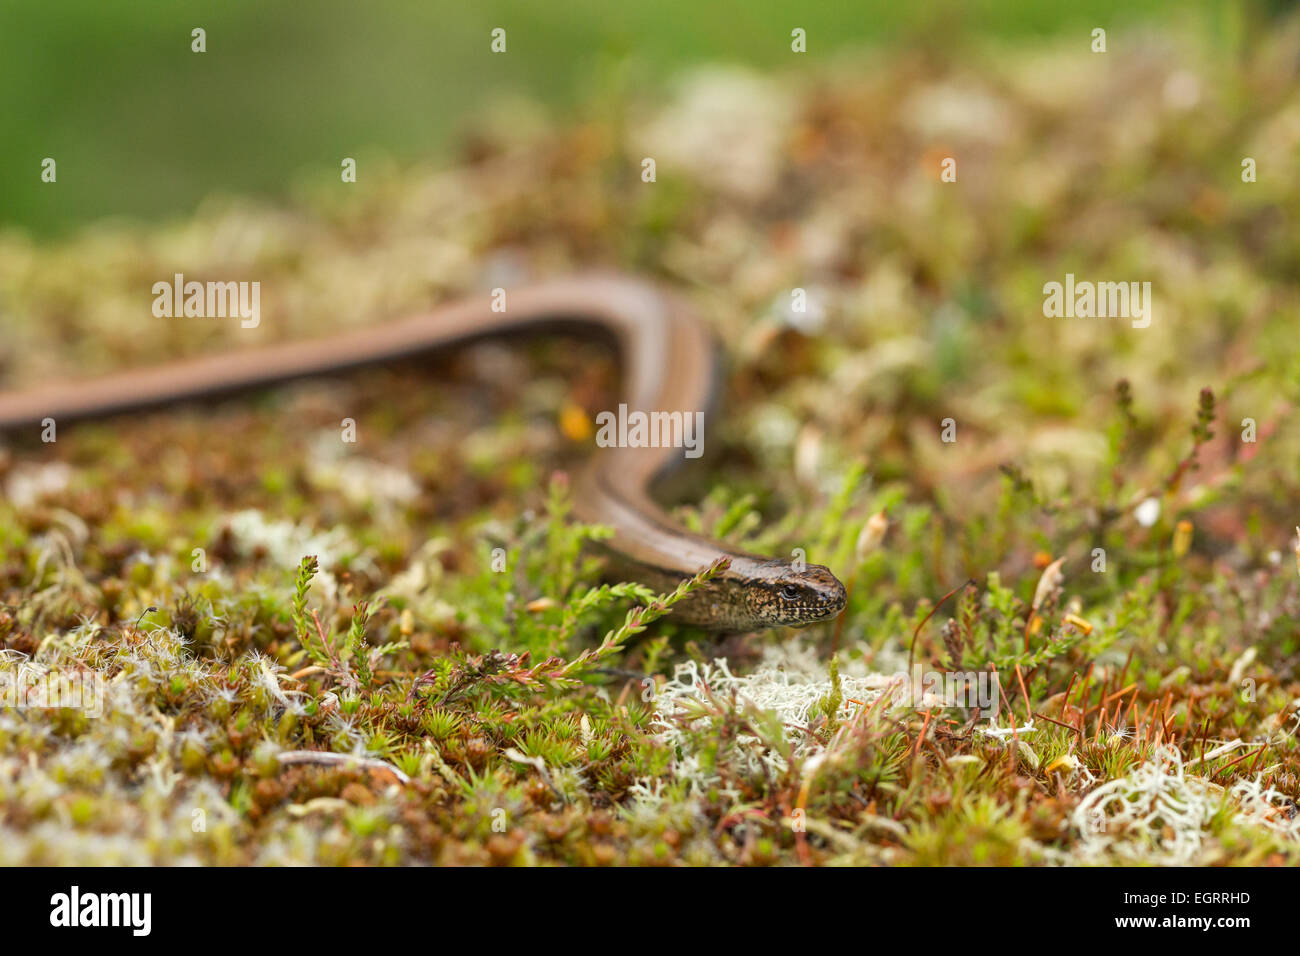 Slow worm Anguis fragilis (controlled conditions), adult female, on heathland vegetation, Arne, Dorset in May. Stock Photo